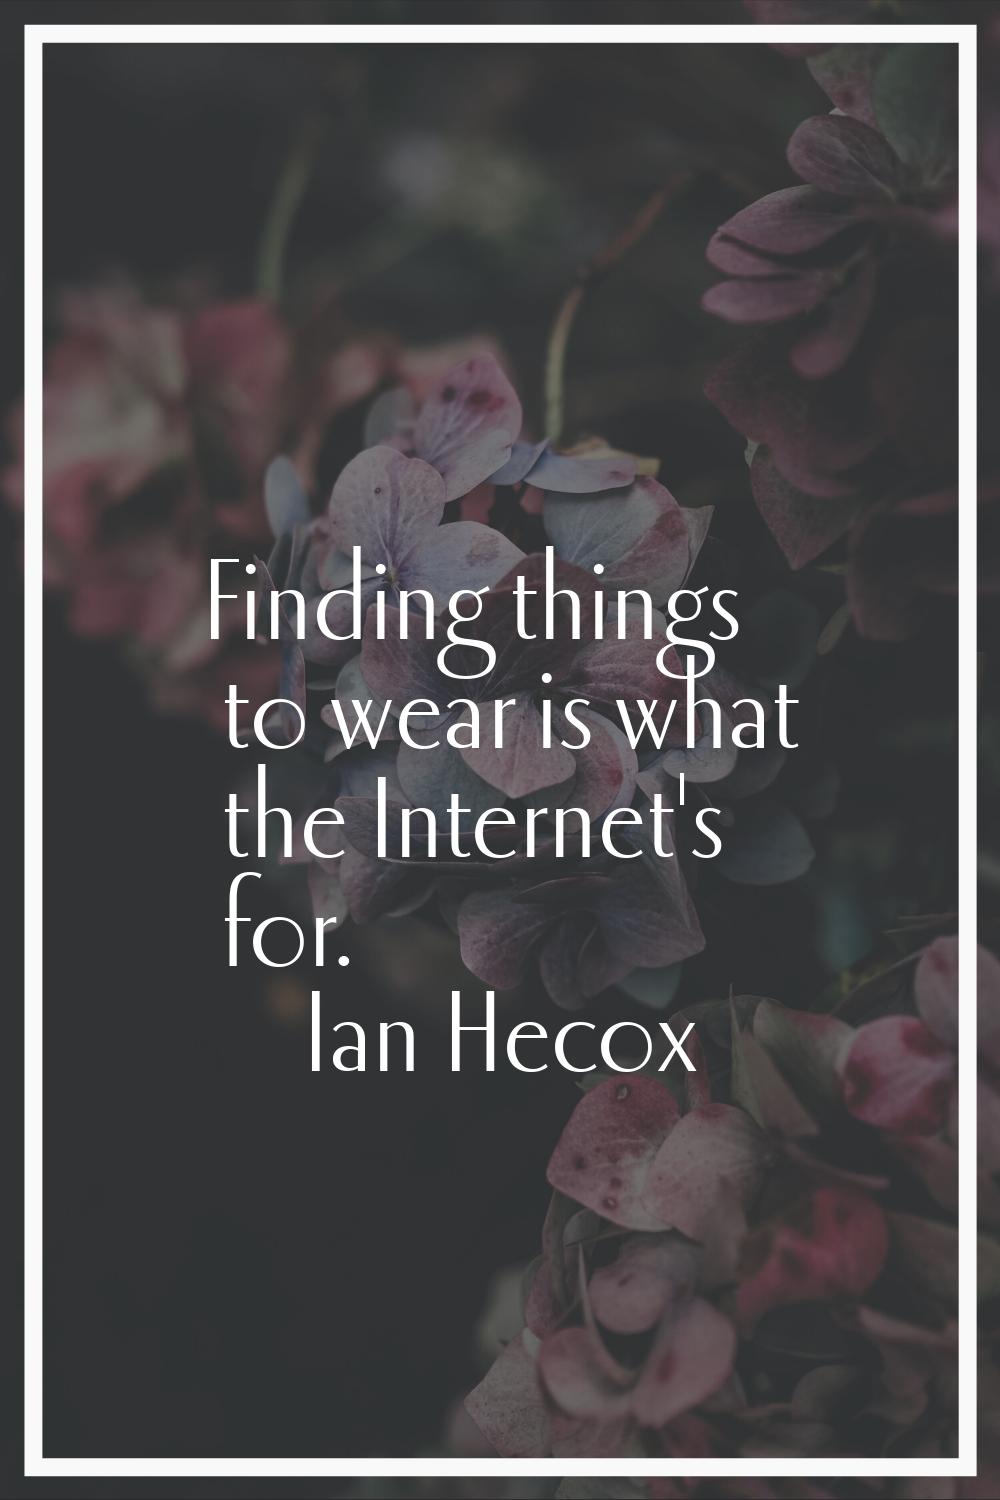 Finding things to wear is what the Internet's for.